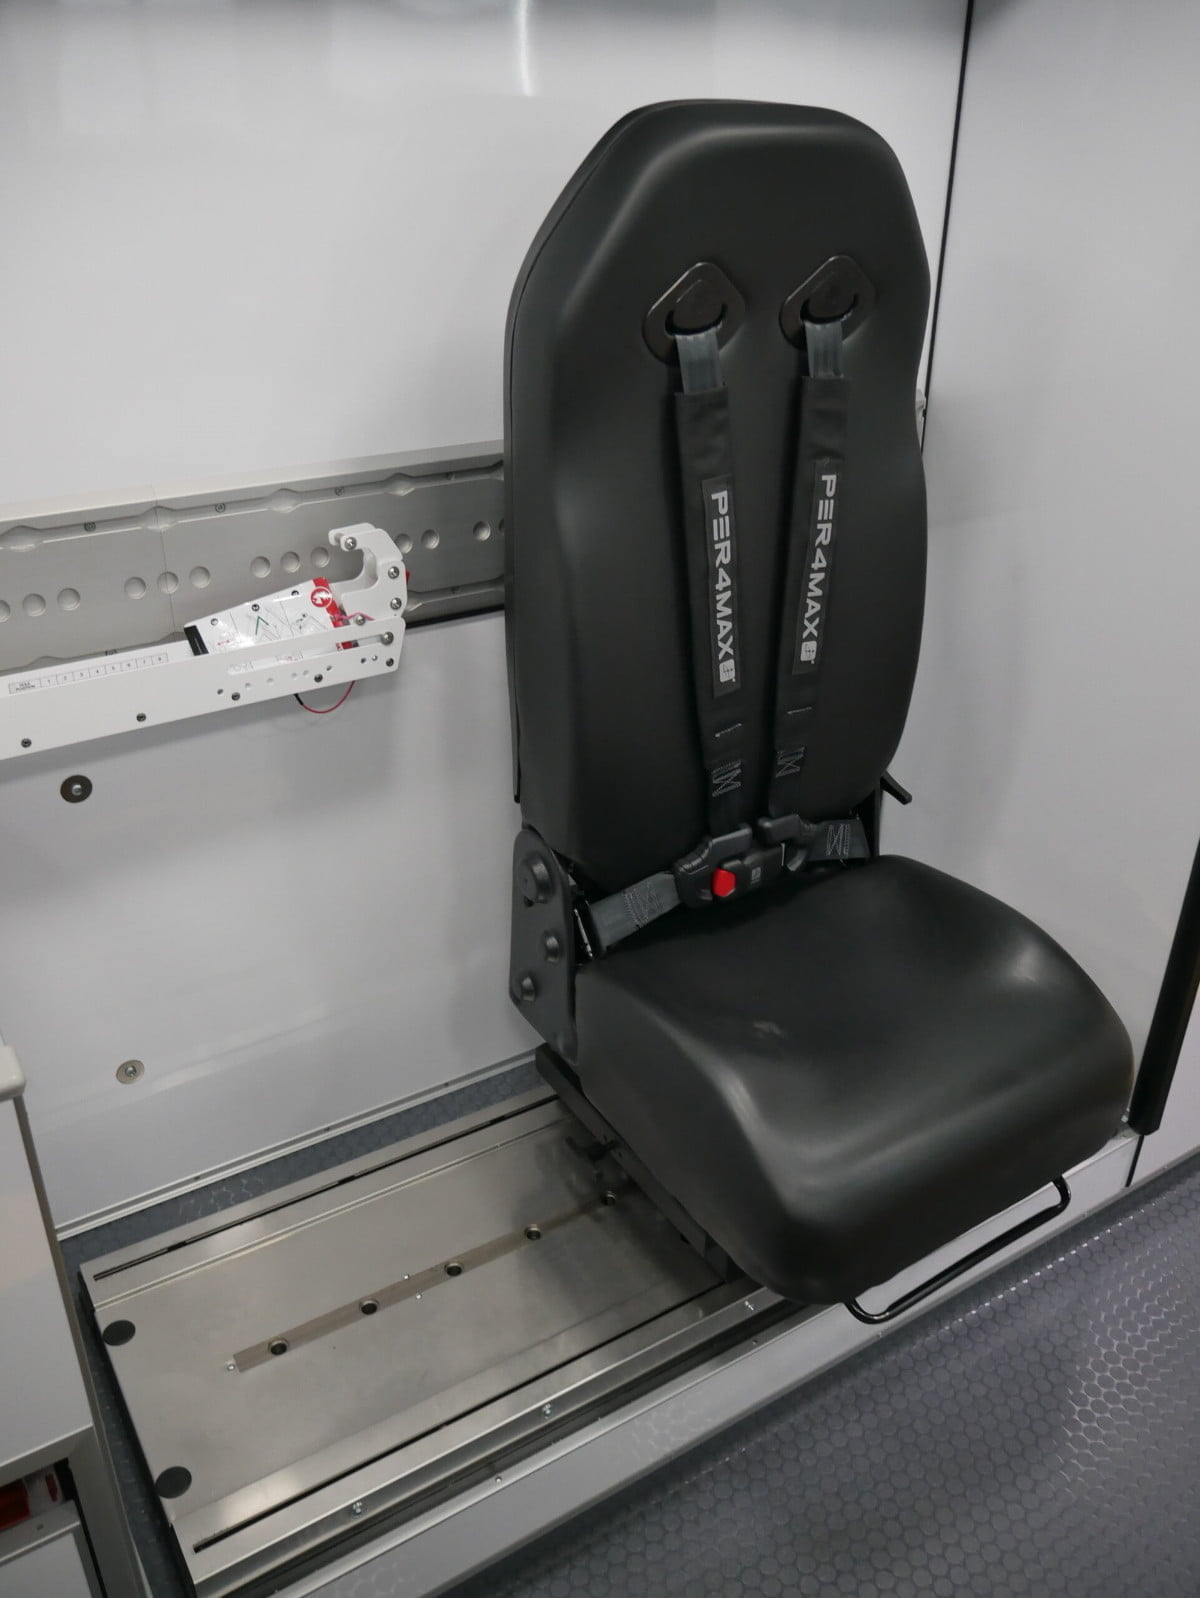 Cambridge wanted the ability to carry two patients, so it had AEV install a sliding and swiveling captain's chair that can be folded flat on the curb side of the patient module, with Ferno INTRAXX fixtures on the wall designed to hold rotating arms that can mount a backboard and military style litter.